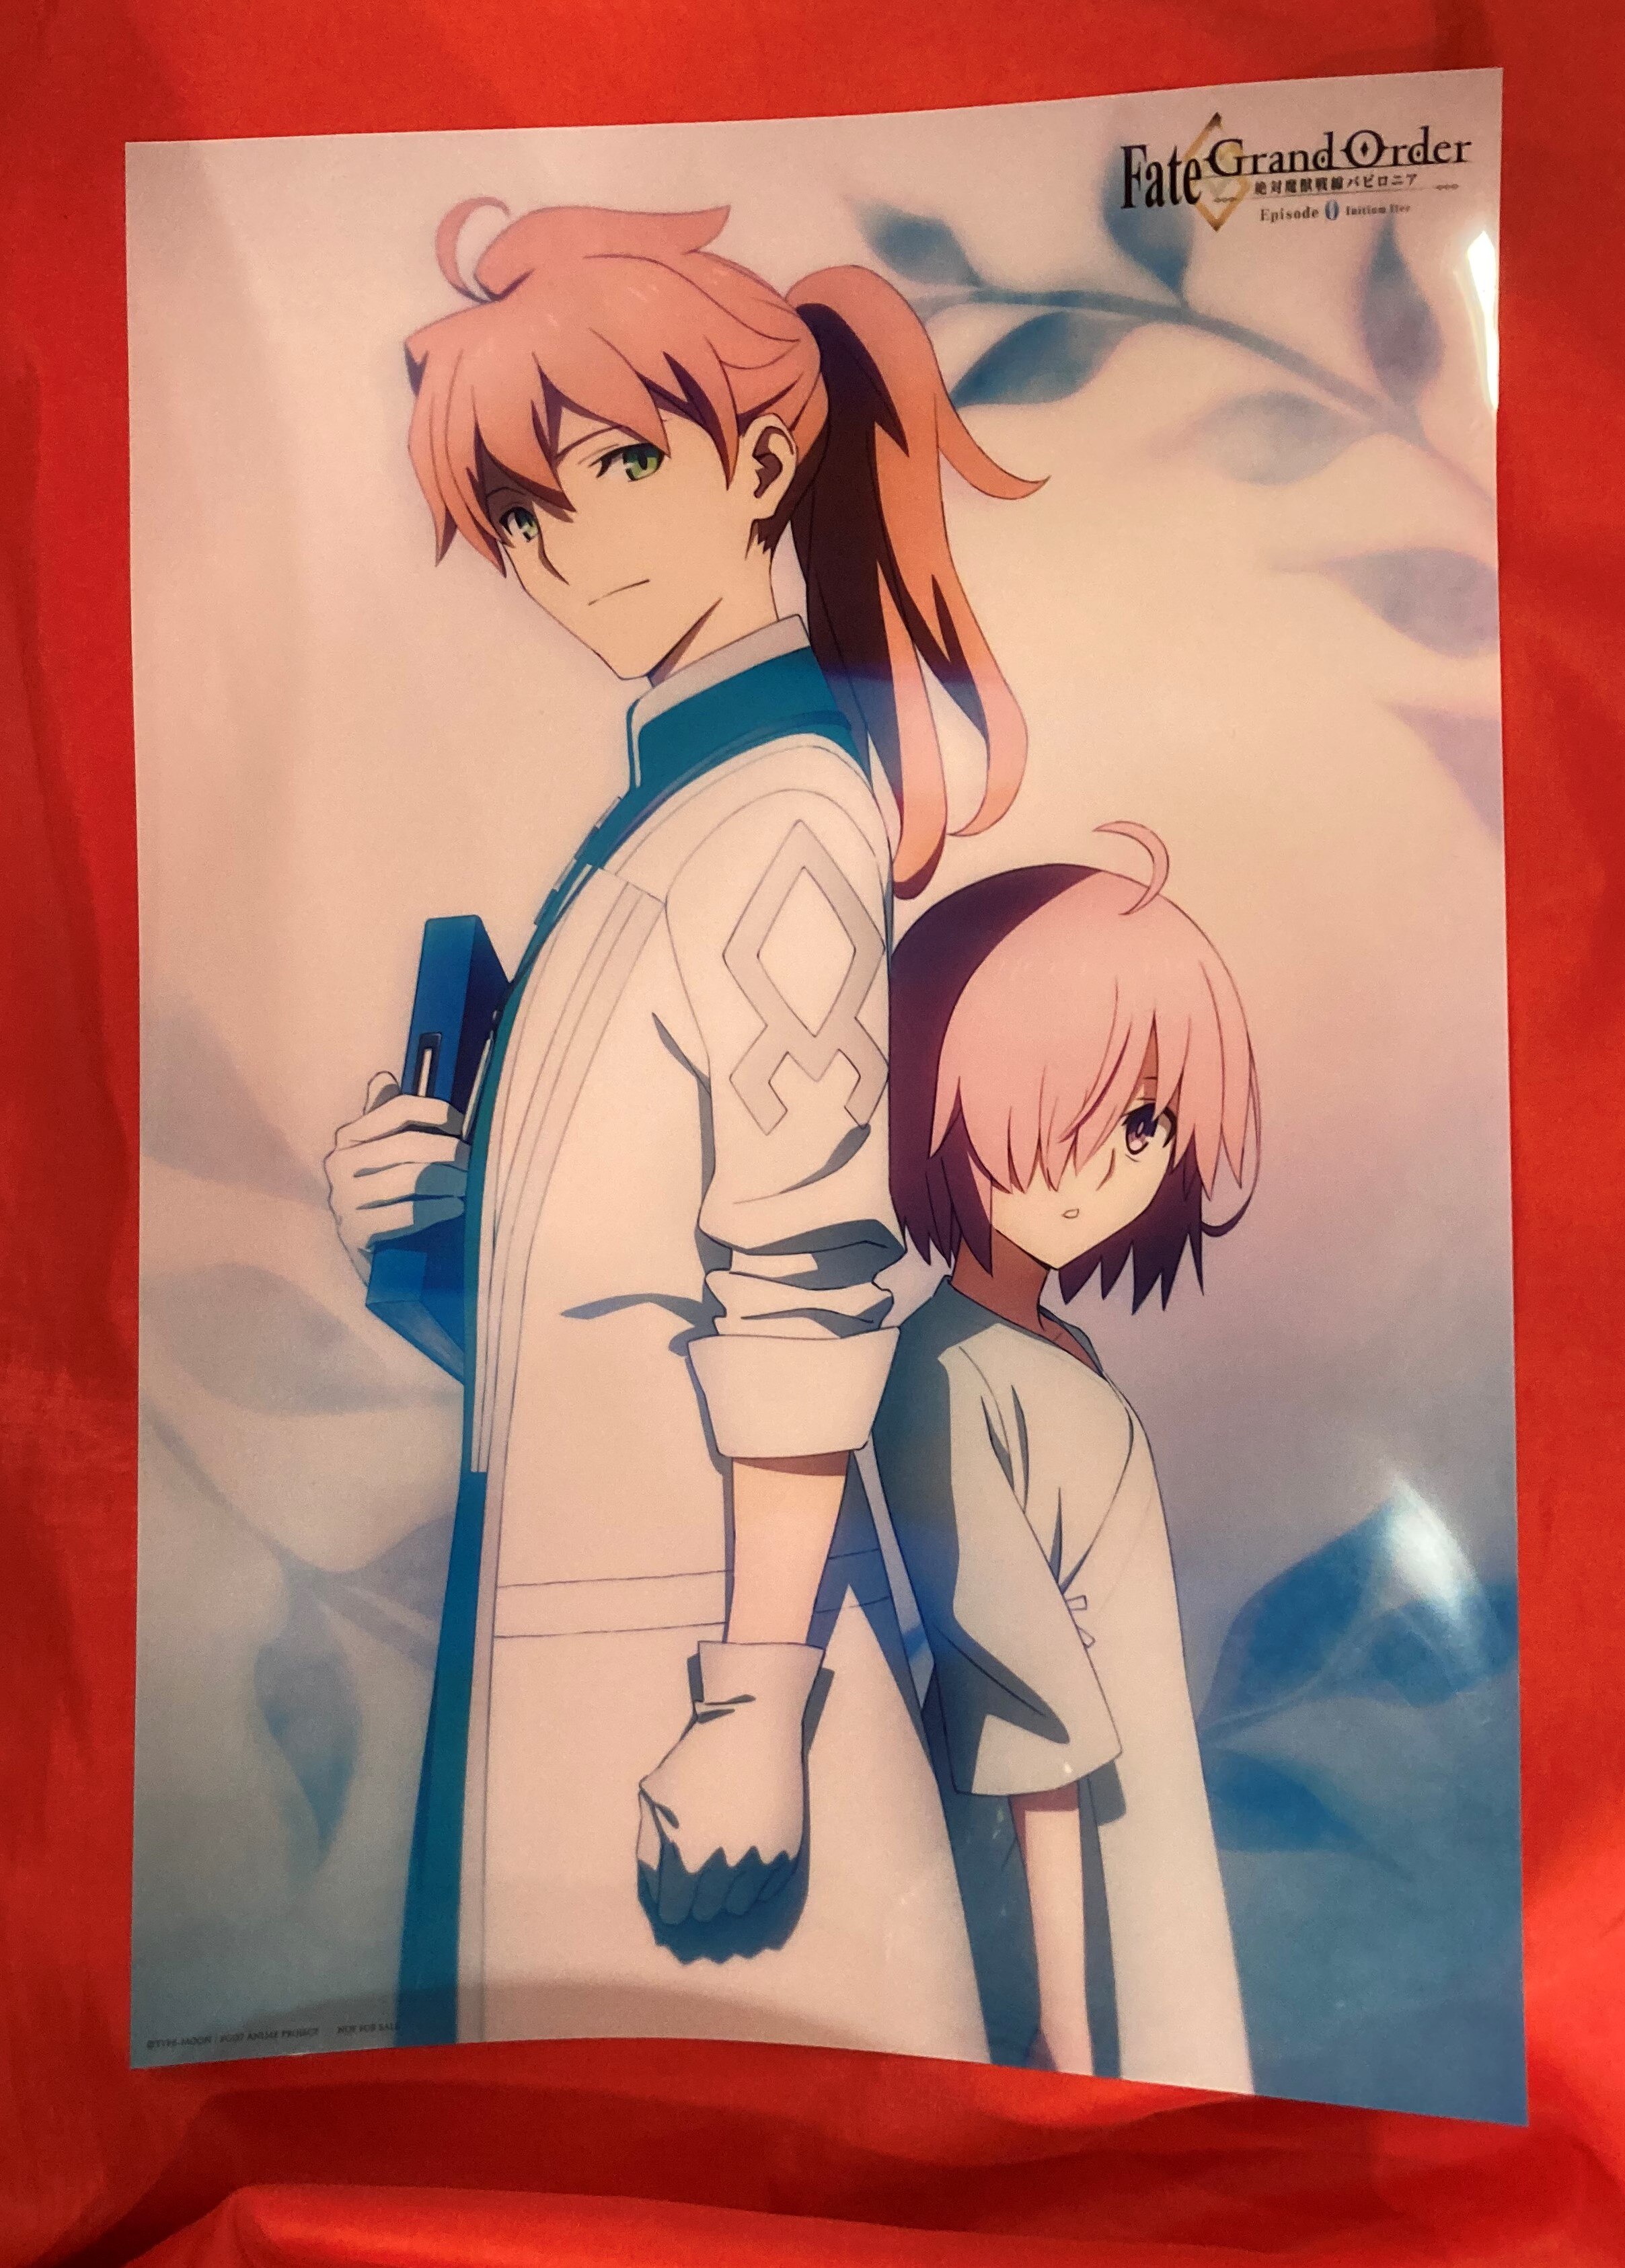 Clear Poster Fate Grand Order Bd Volume 1 Purchase Bonus A3 Clear Poster Episode 0 Target 3477